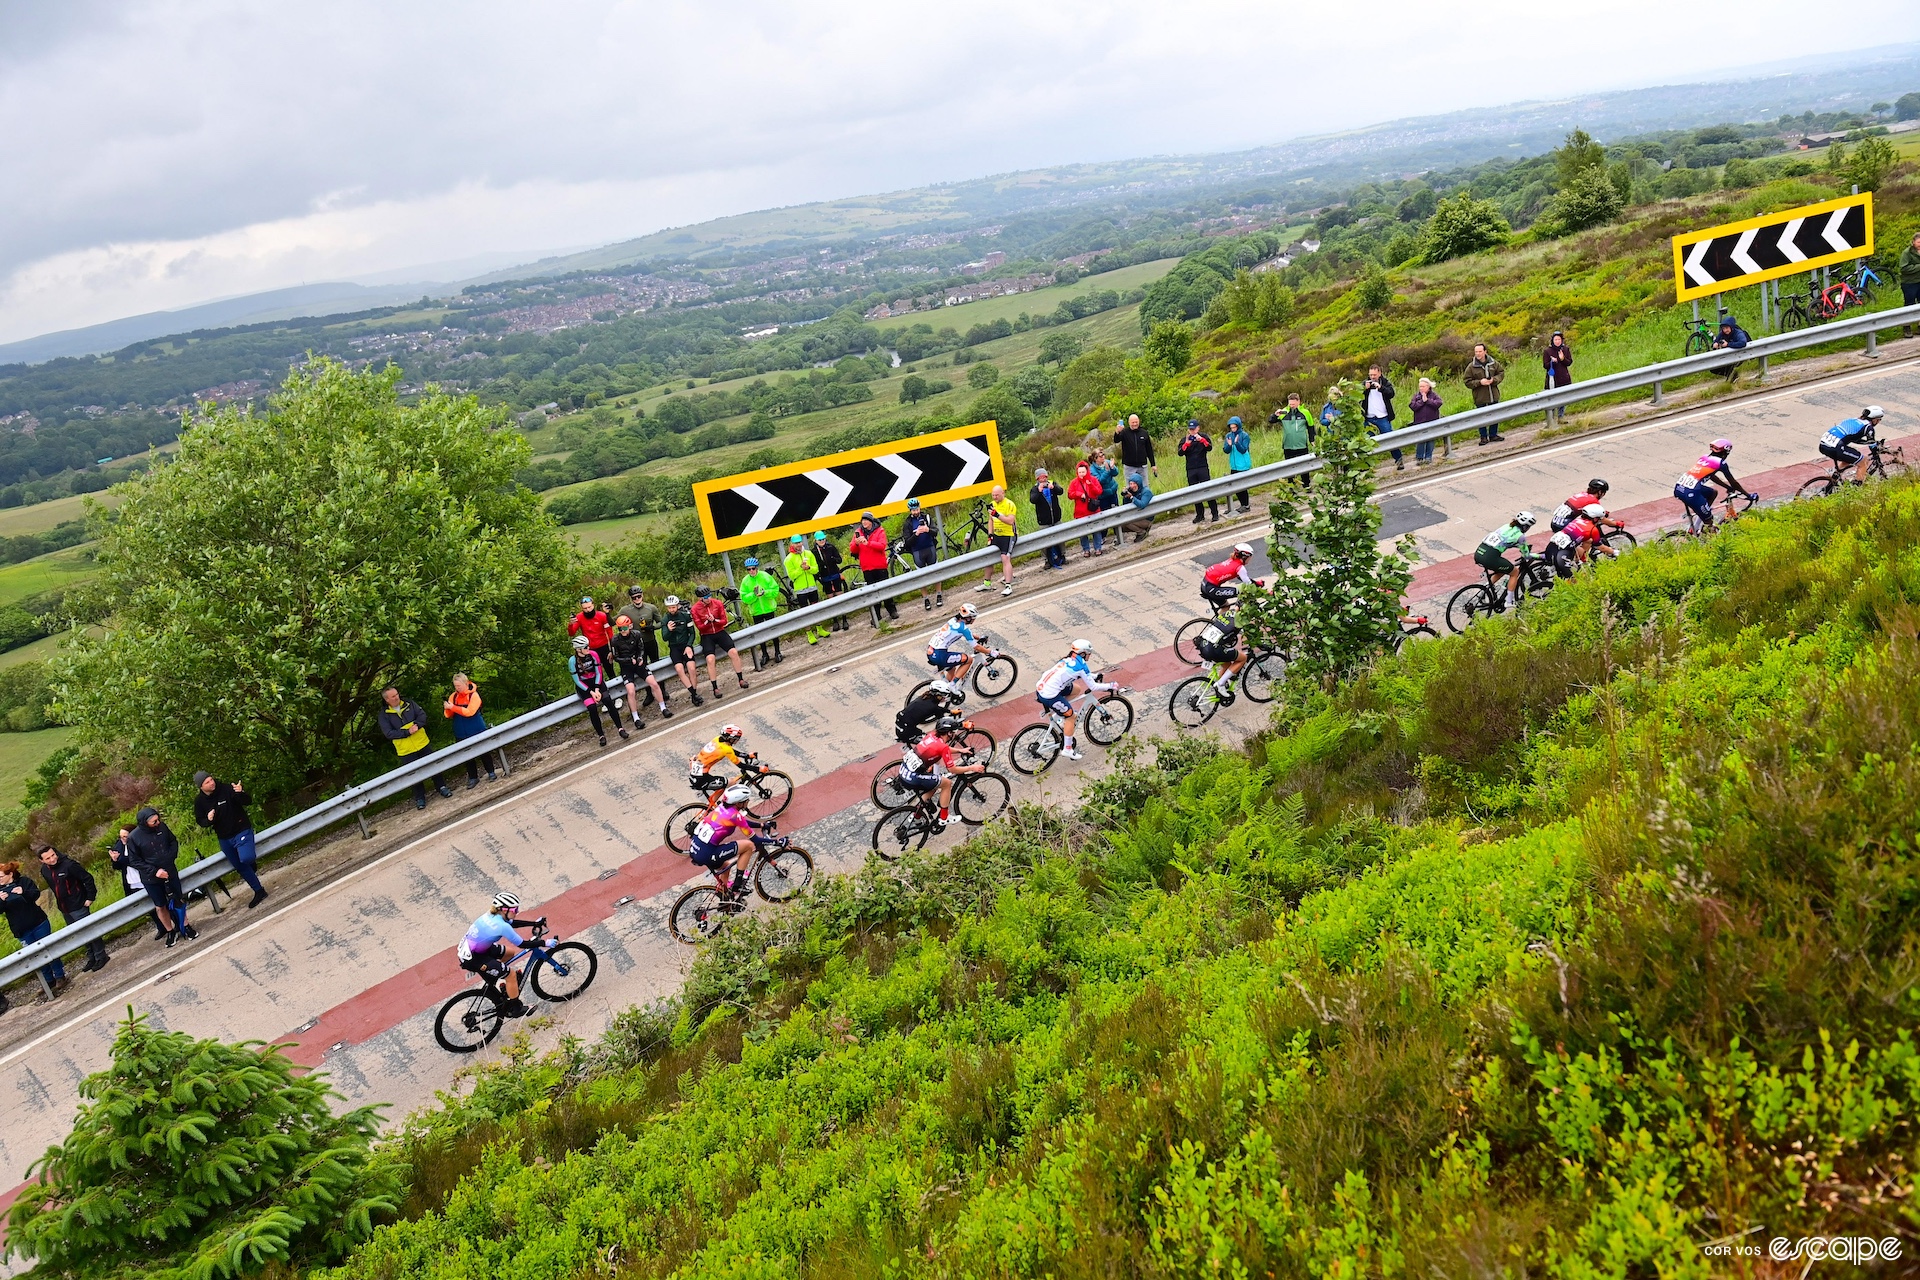 The women's peloton strung out as the ride up a climb in the UK.